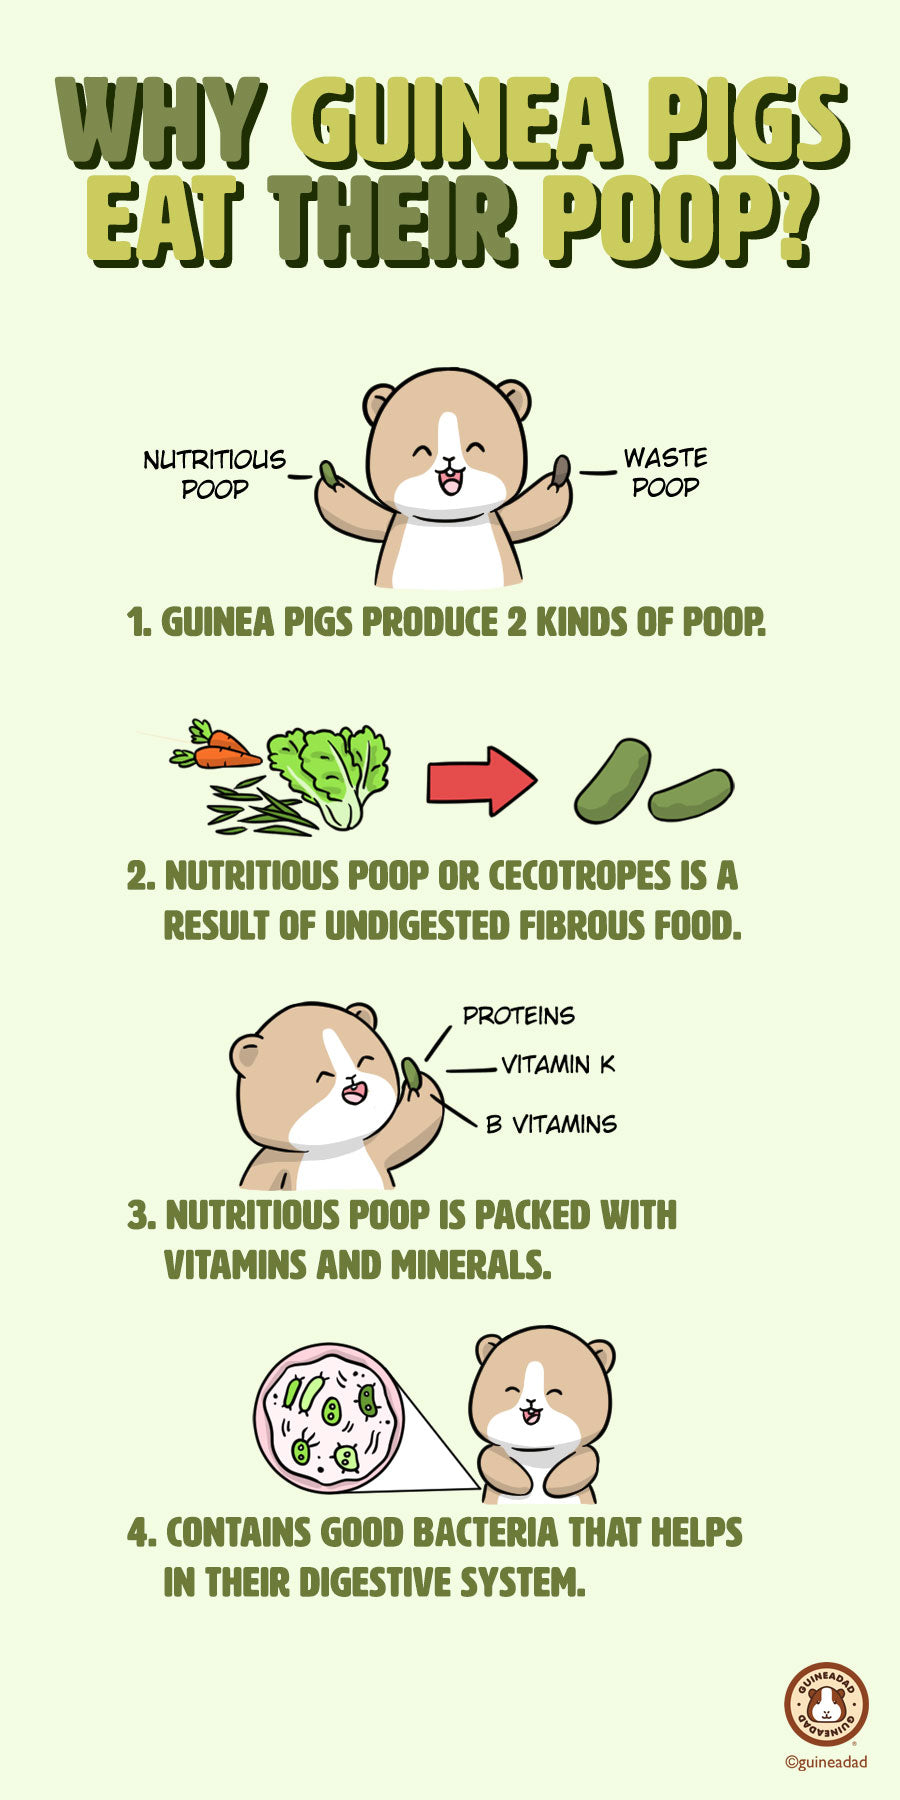 Why do guinea pigs eat their poop?